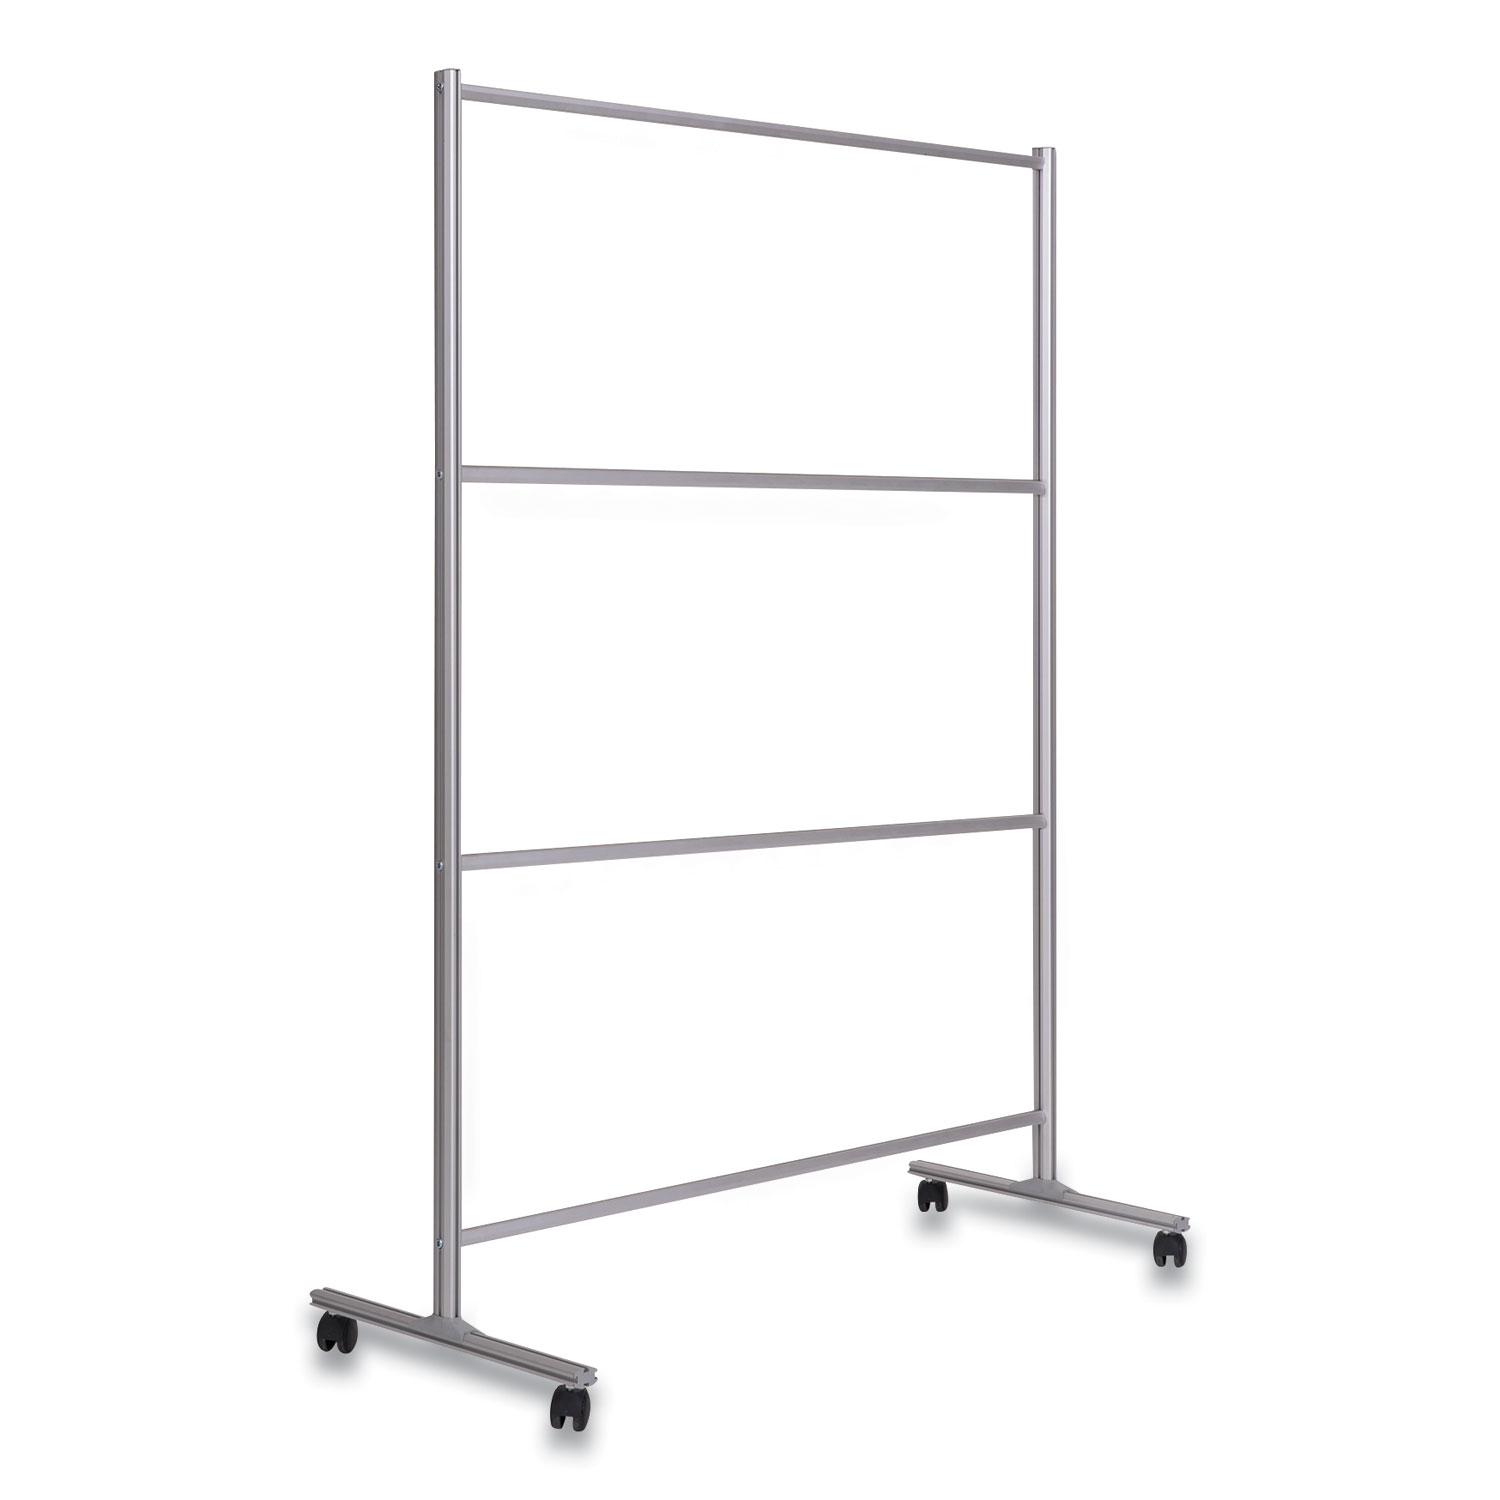  MasterVision DSP273046 Protector Series Mobile Glass Panel Divider, 80.3 x 22 x 50, Clear/Aluminum (BVCDSP273046) 